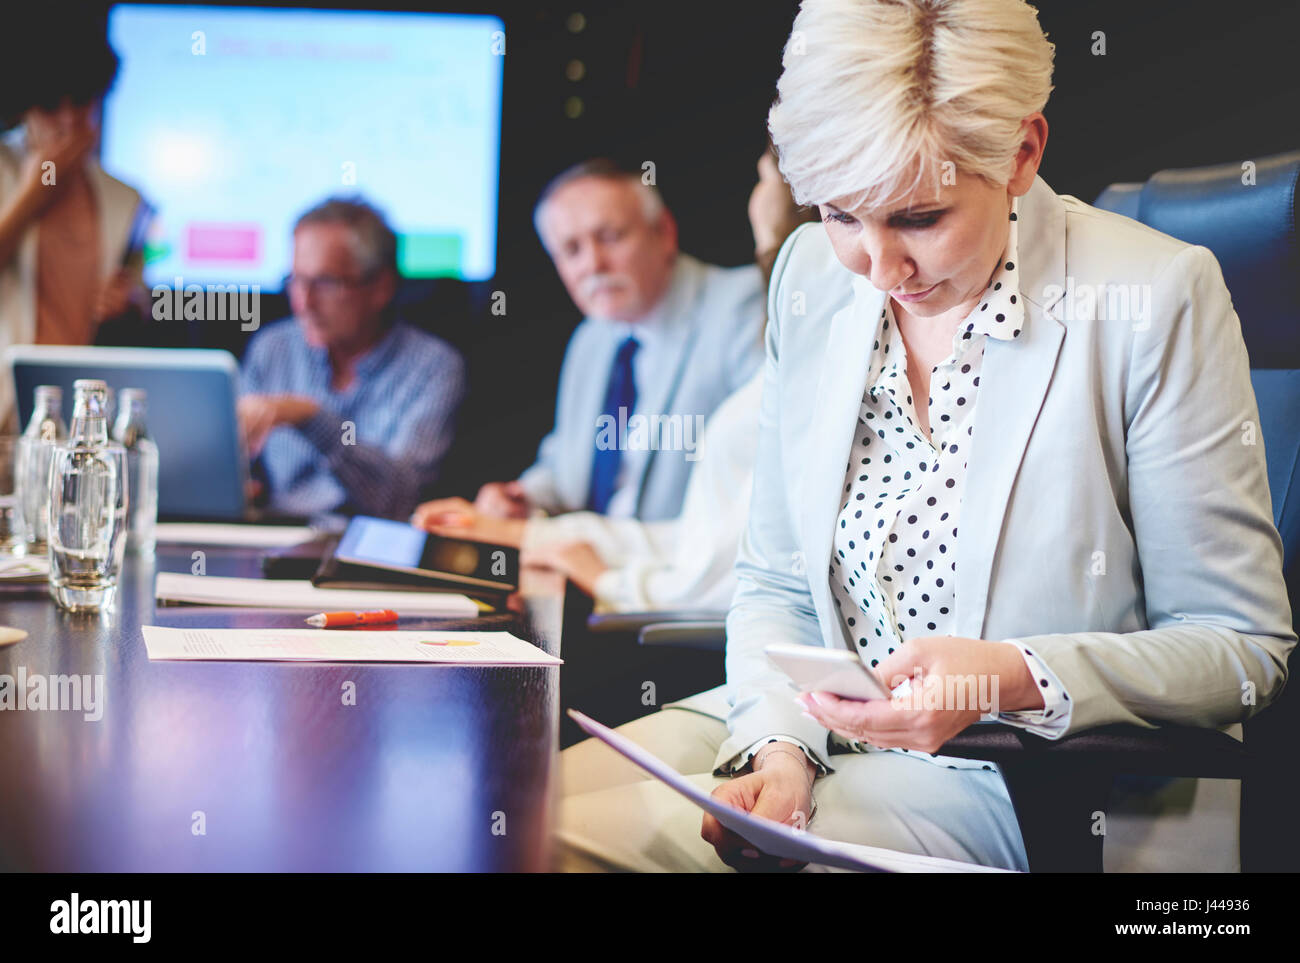 Mature woman taking picture of documents at work Stock Photo